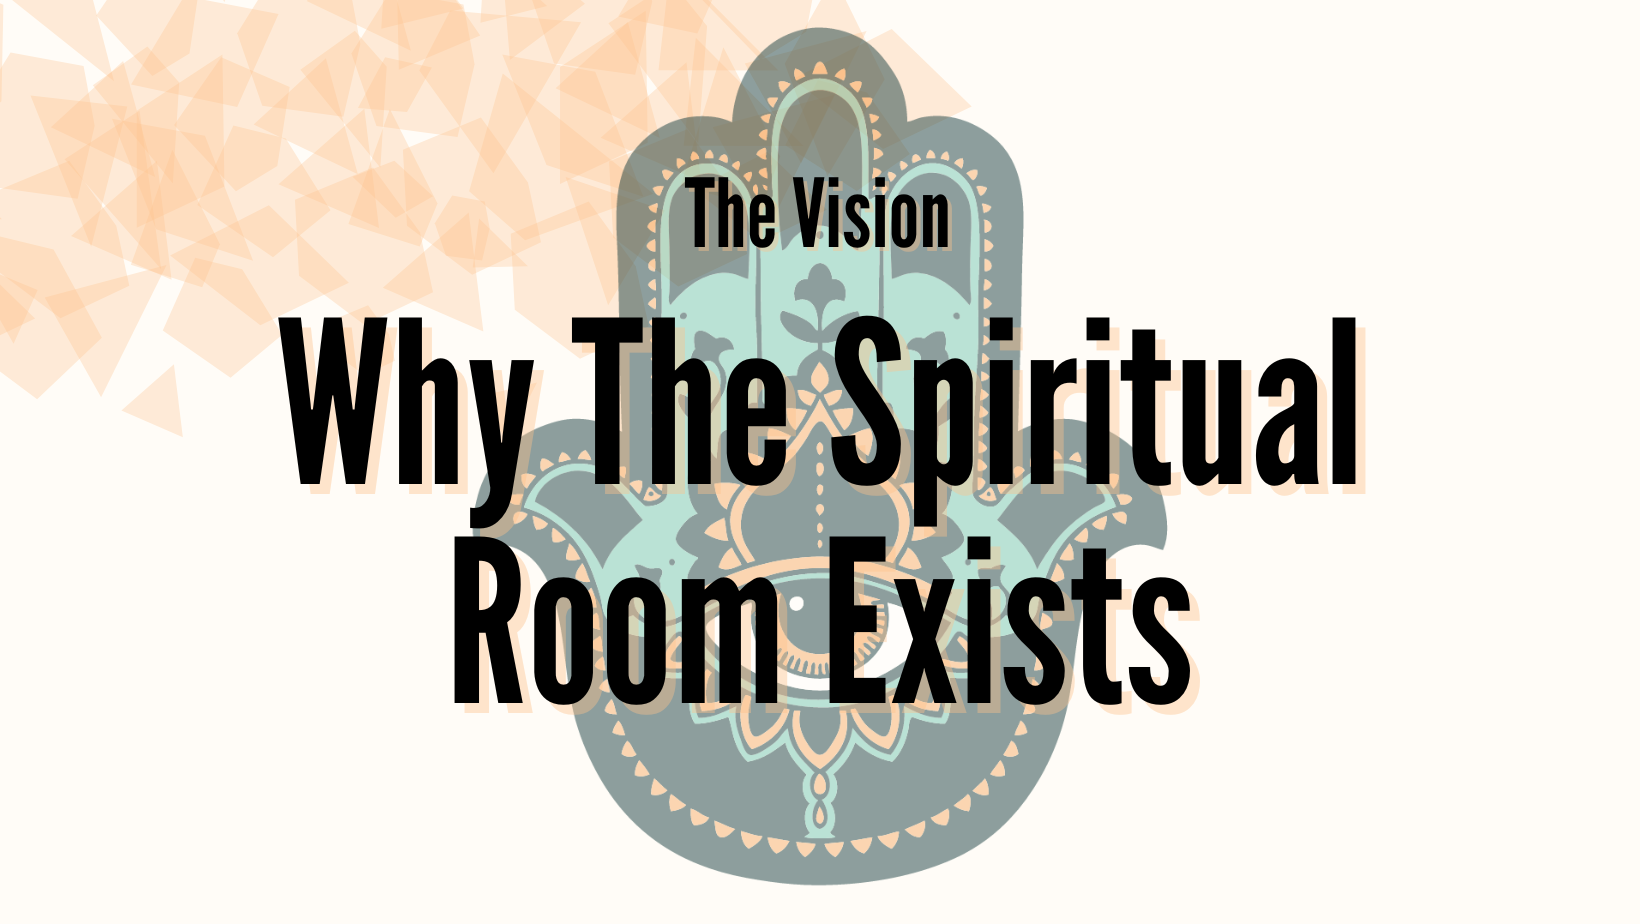 The Vision At The Spiritual Room